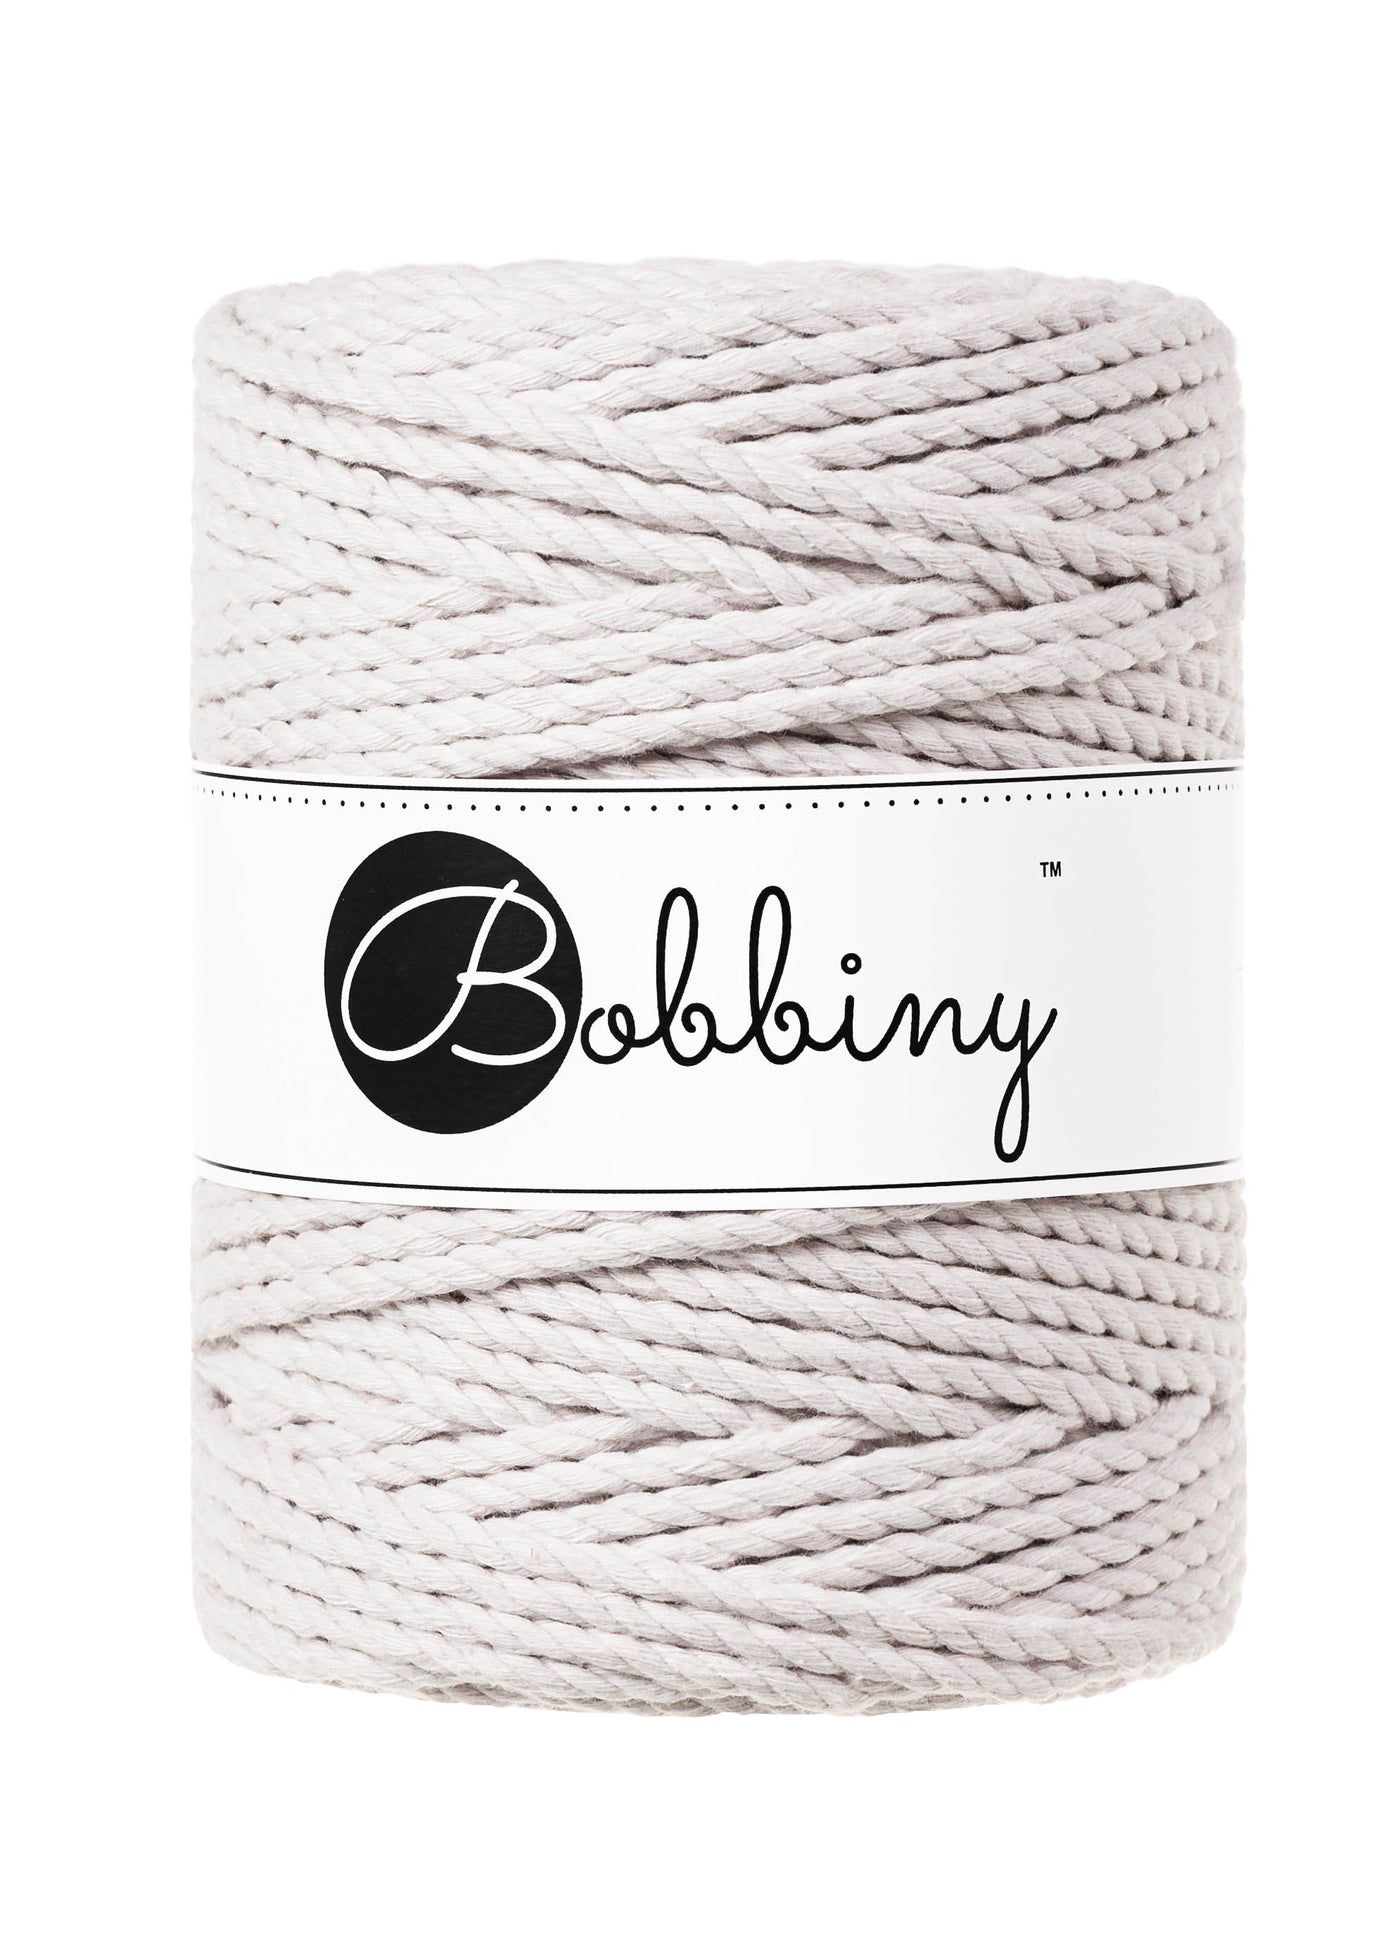 This superb product from Bobbiny is a welcome addition to their gorgeous range of products.  Made from 100% recycled cotton, it is perfect for Macrame projects due to its sturdiness. It contains no harmful dyes or chemicals and is OEKO-TEX certified.  This super soft triple twist rope also makes the most spectacular fringes and tassels.  Length: 100m (108 Yards)  Weight: 800gms  Contains 120 Fibres ( 3x40 )  Also available in 3mm